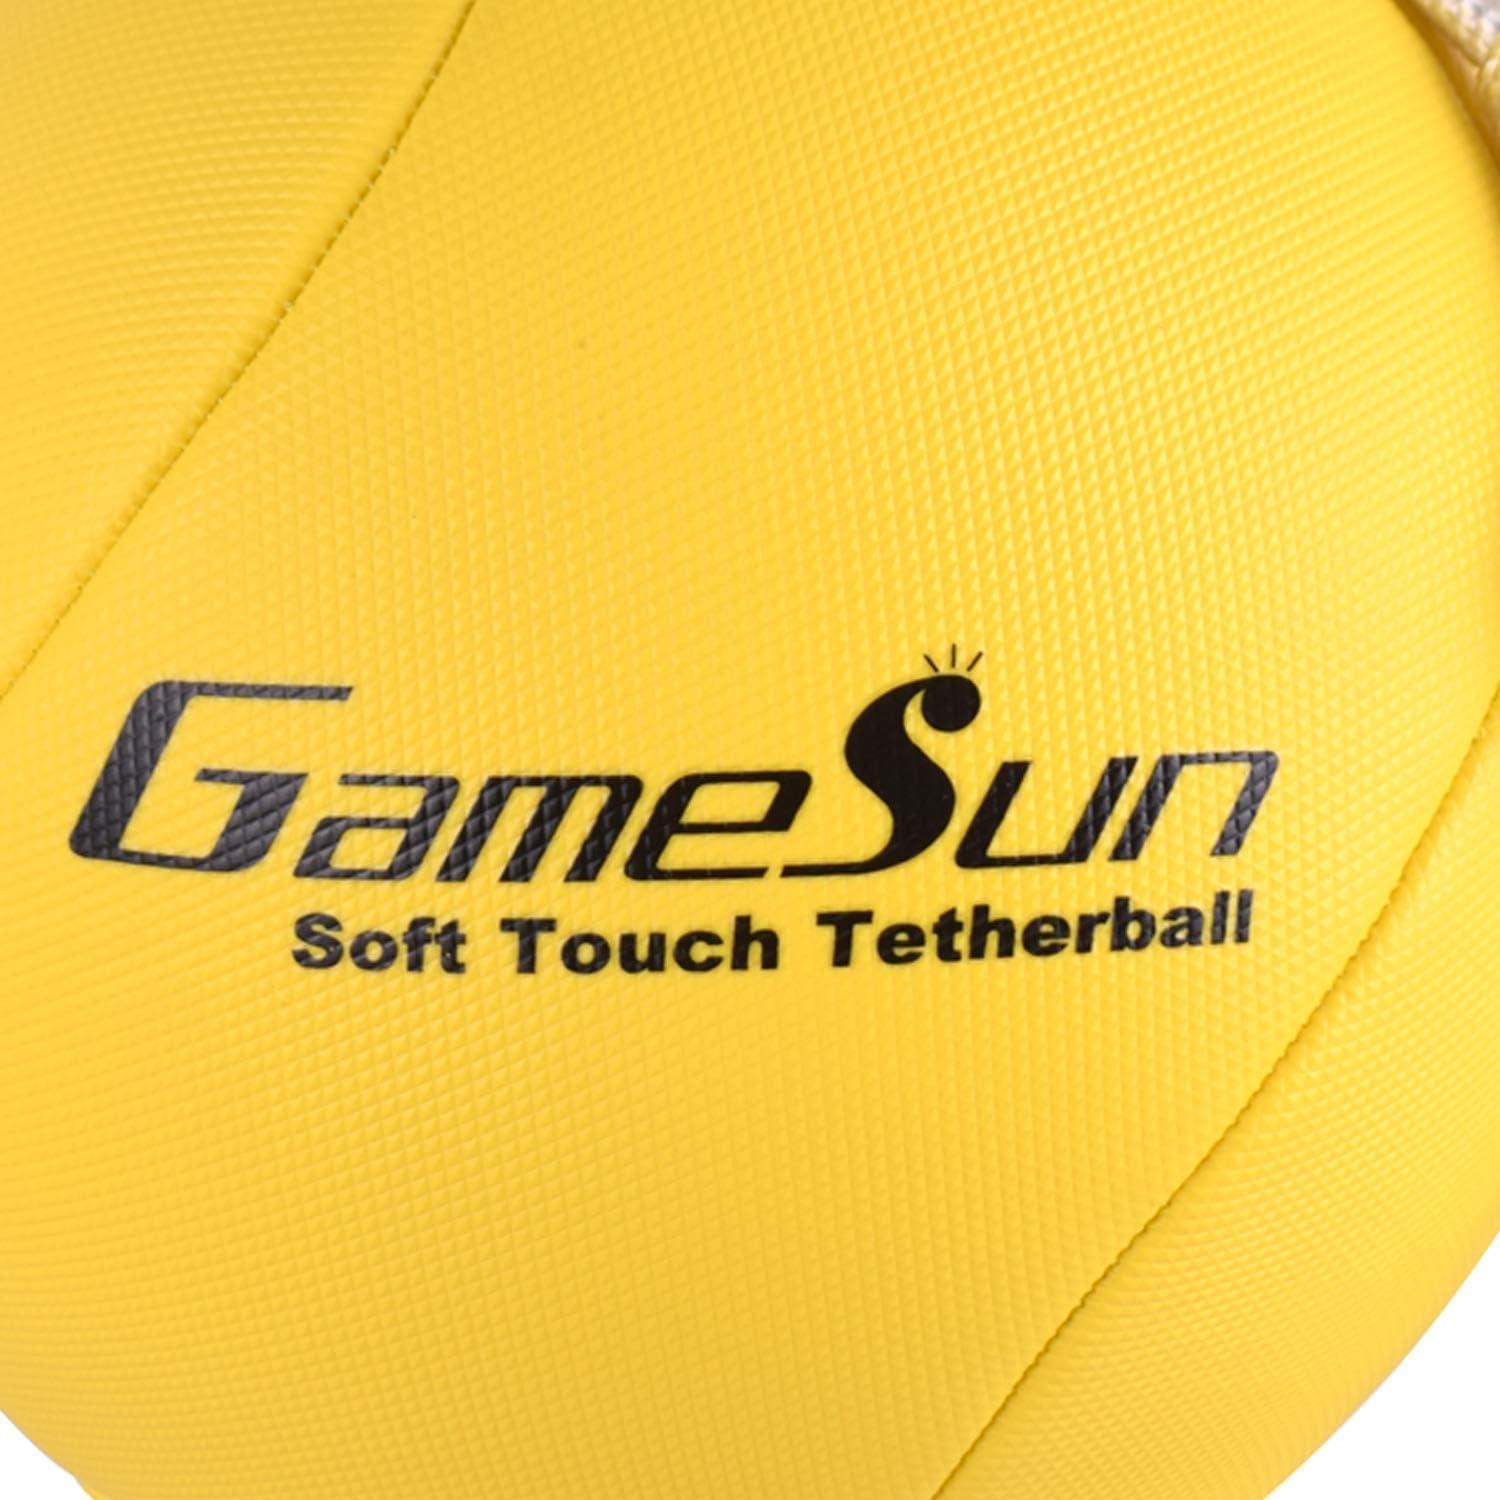  Tetherball Ball and Rope with Carabineer, Soft Touch, Portable  Tetherballs with Soft Rope - Great Outdoor Game for Family Fun Play :  Sports & Outdoors